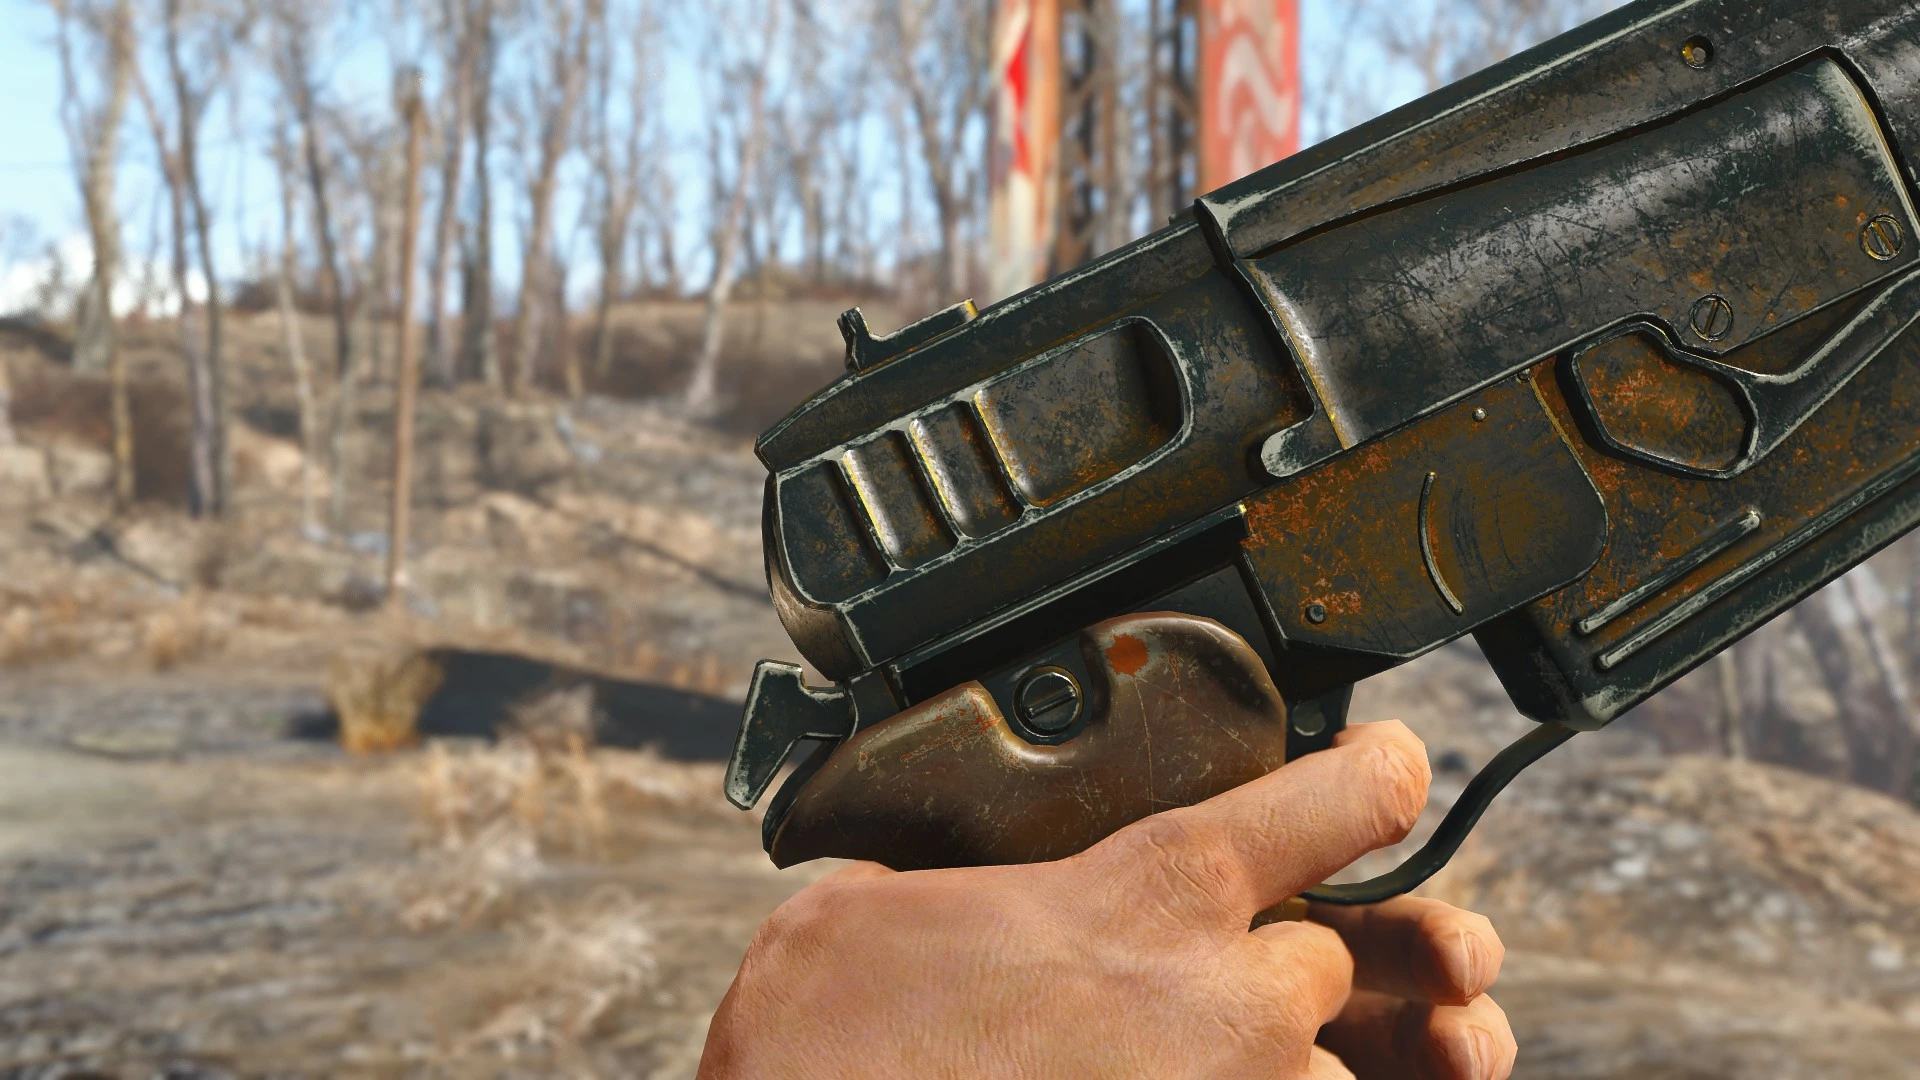 Holstered weapon fallout 4 фото 100